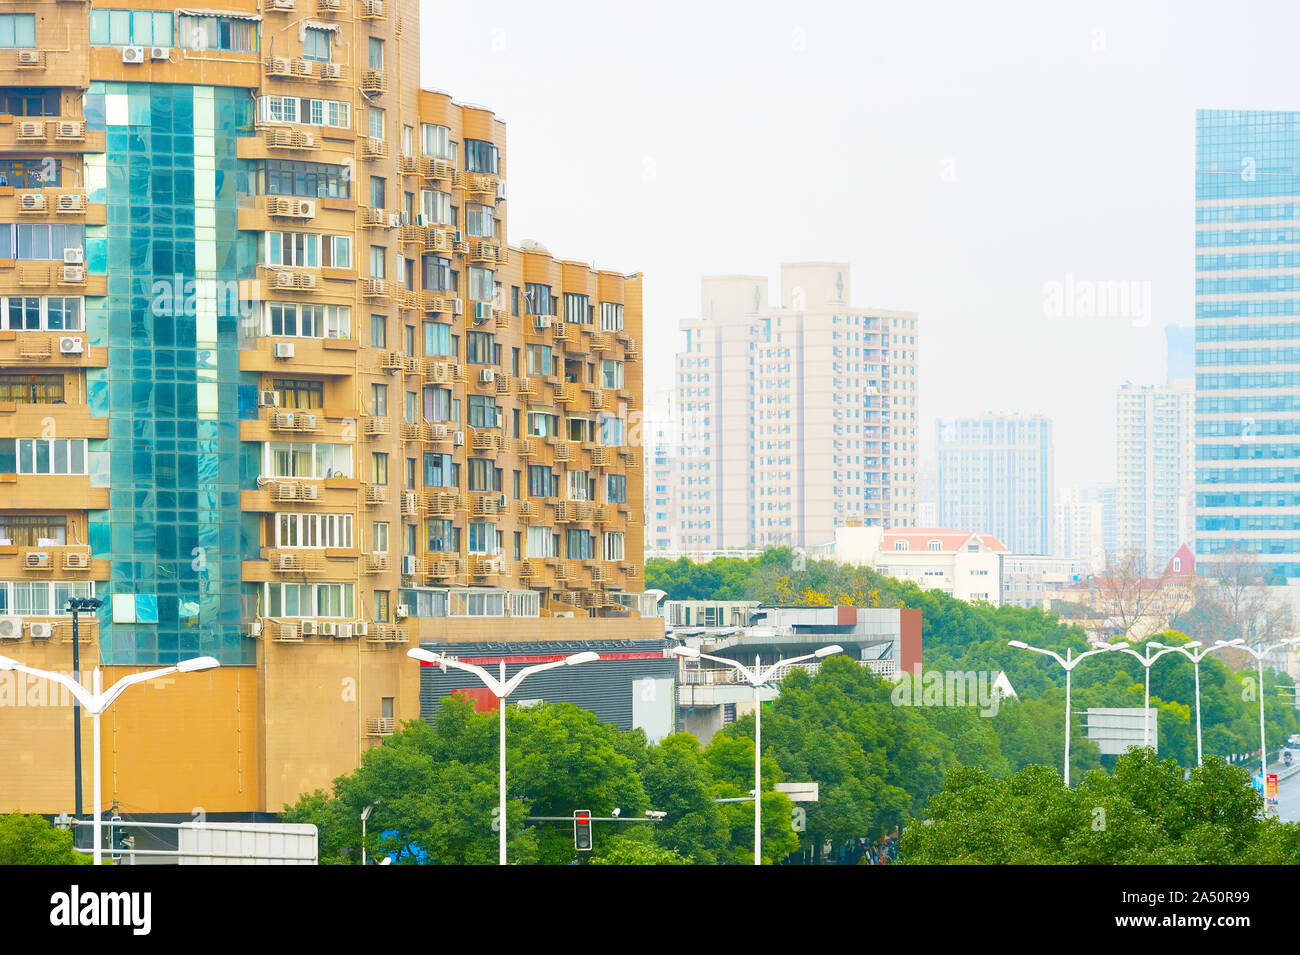 Architecture of typical living districts of Shanghai, China Stock Photo